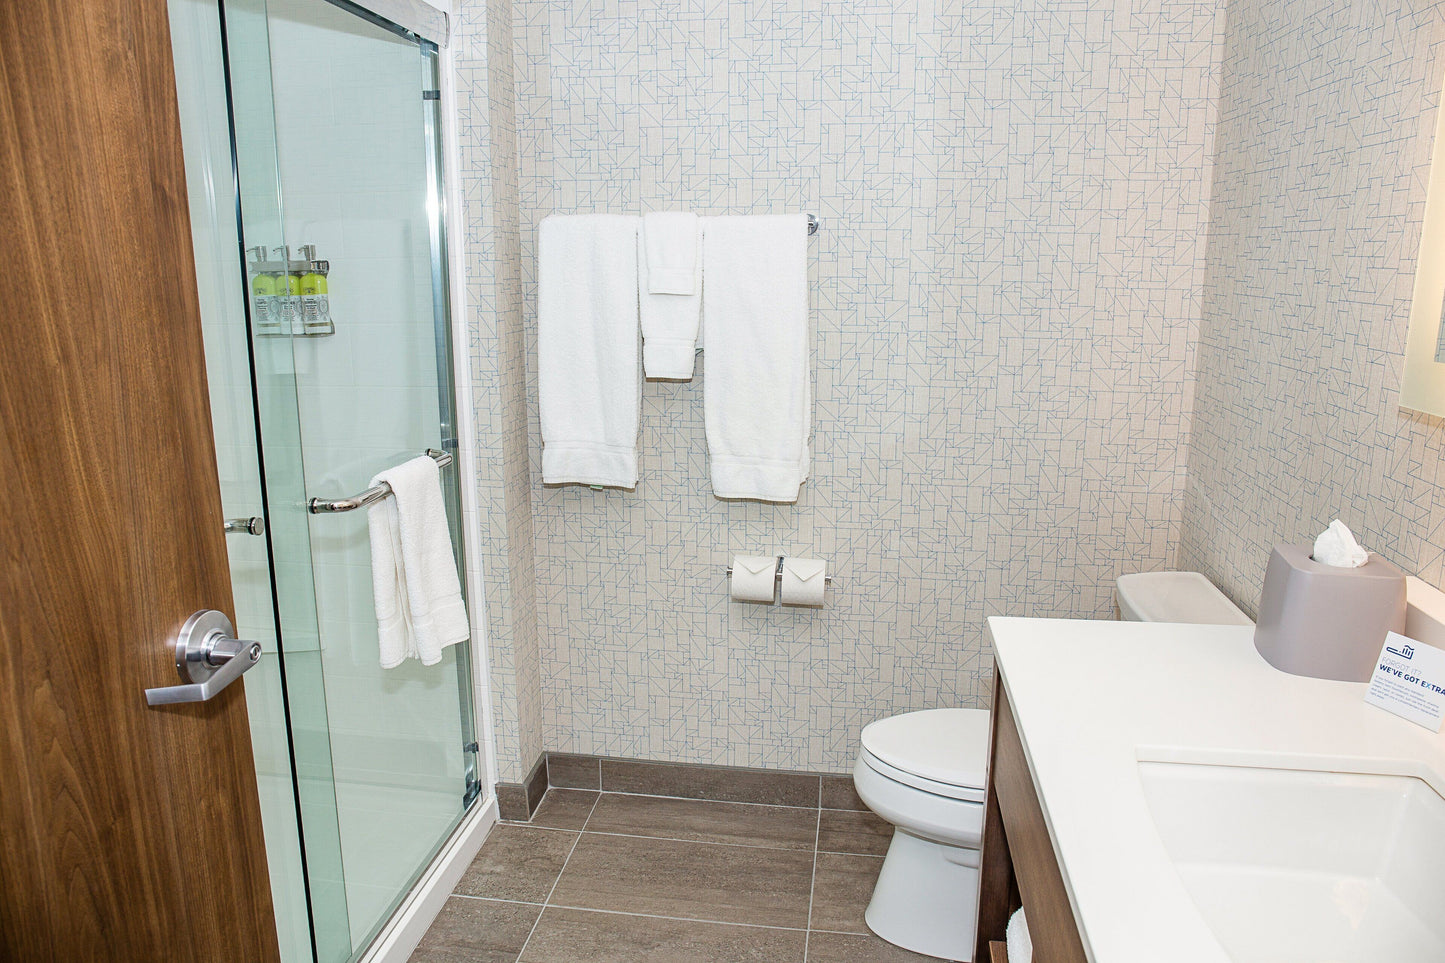 Hotel Review: Holiday Inn Express And Suites Halifax (Reviews, Pricing & Amenities)